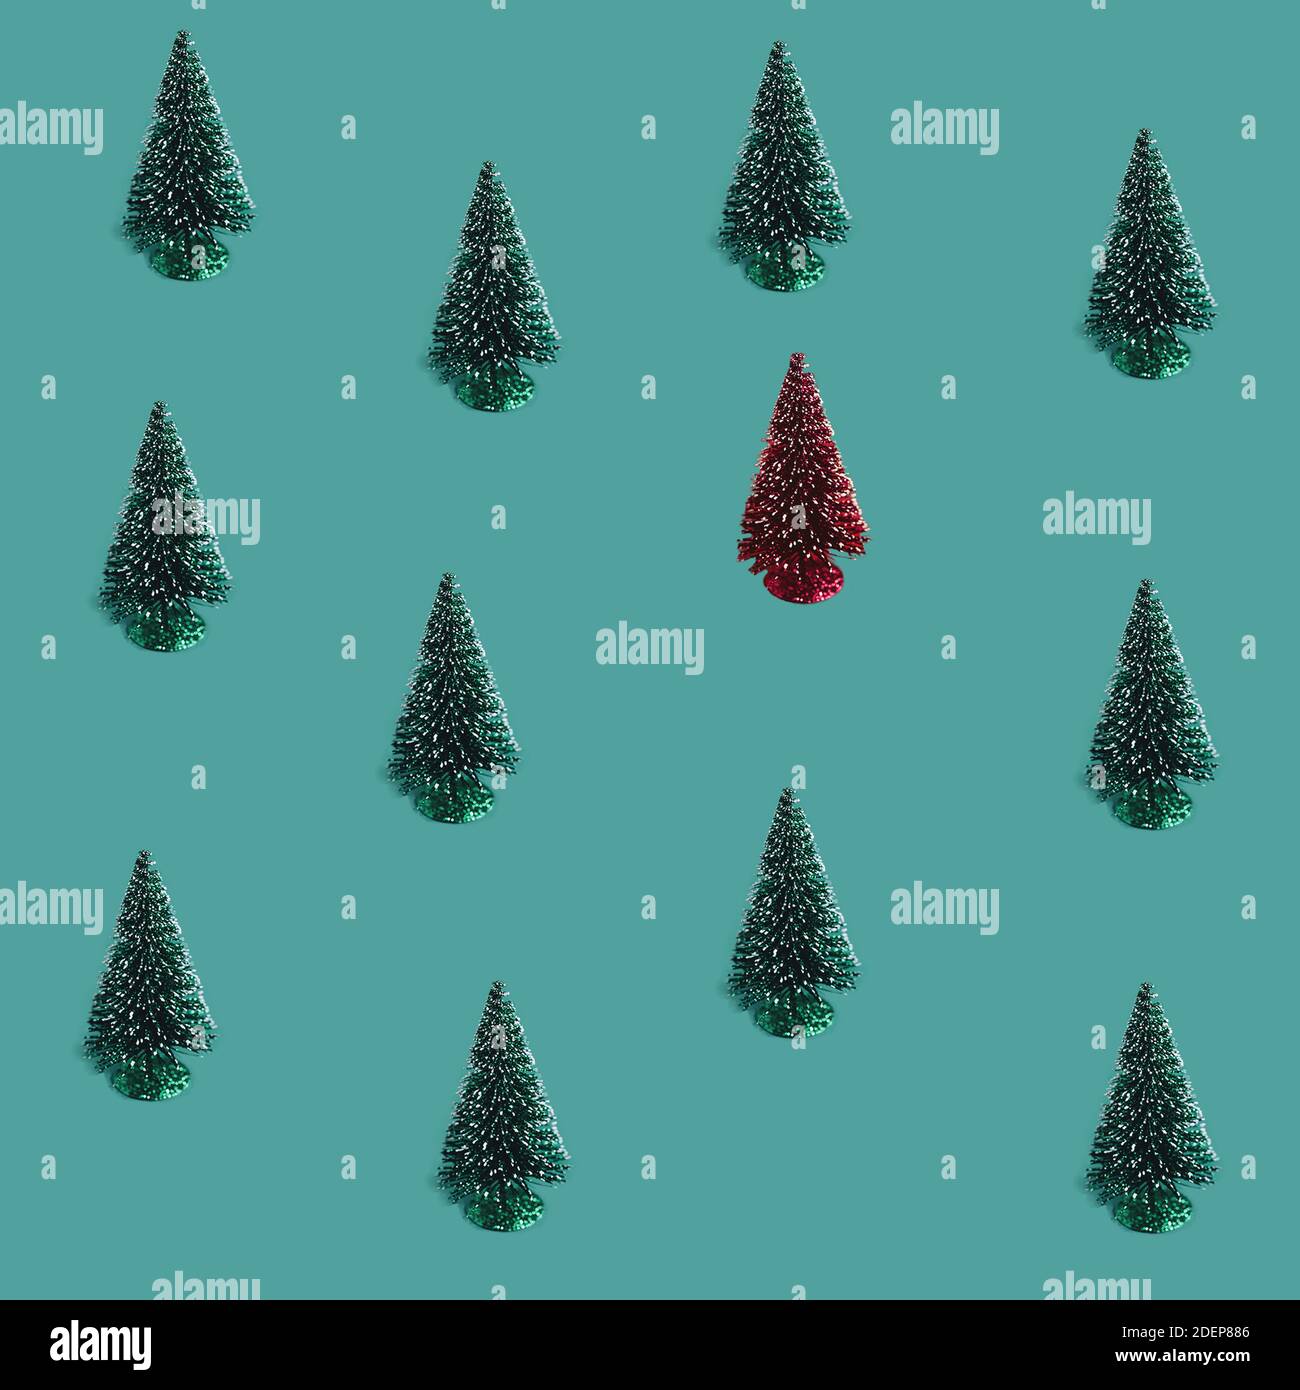 Christmas pine trees pattern on the green background with a red accent Stock Photo